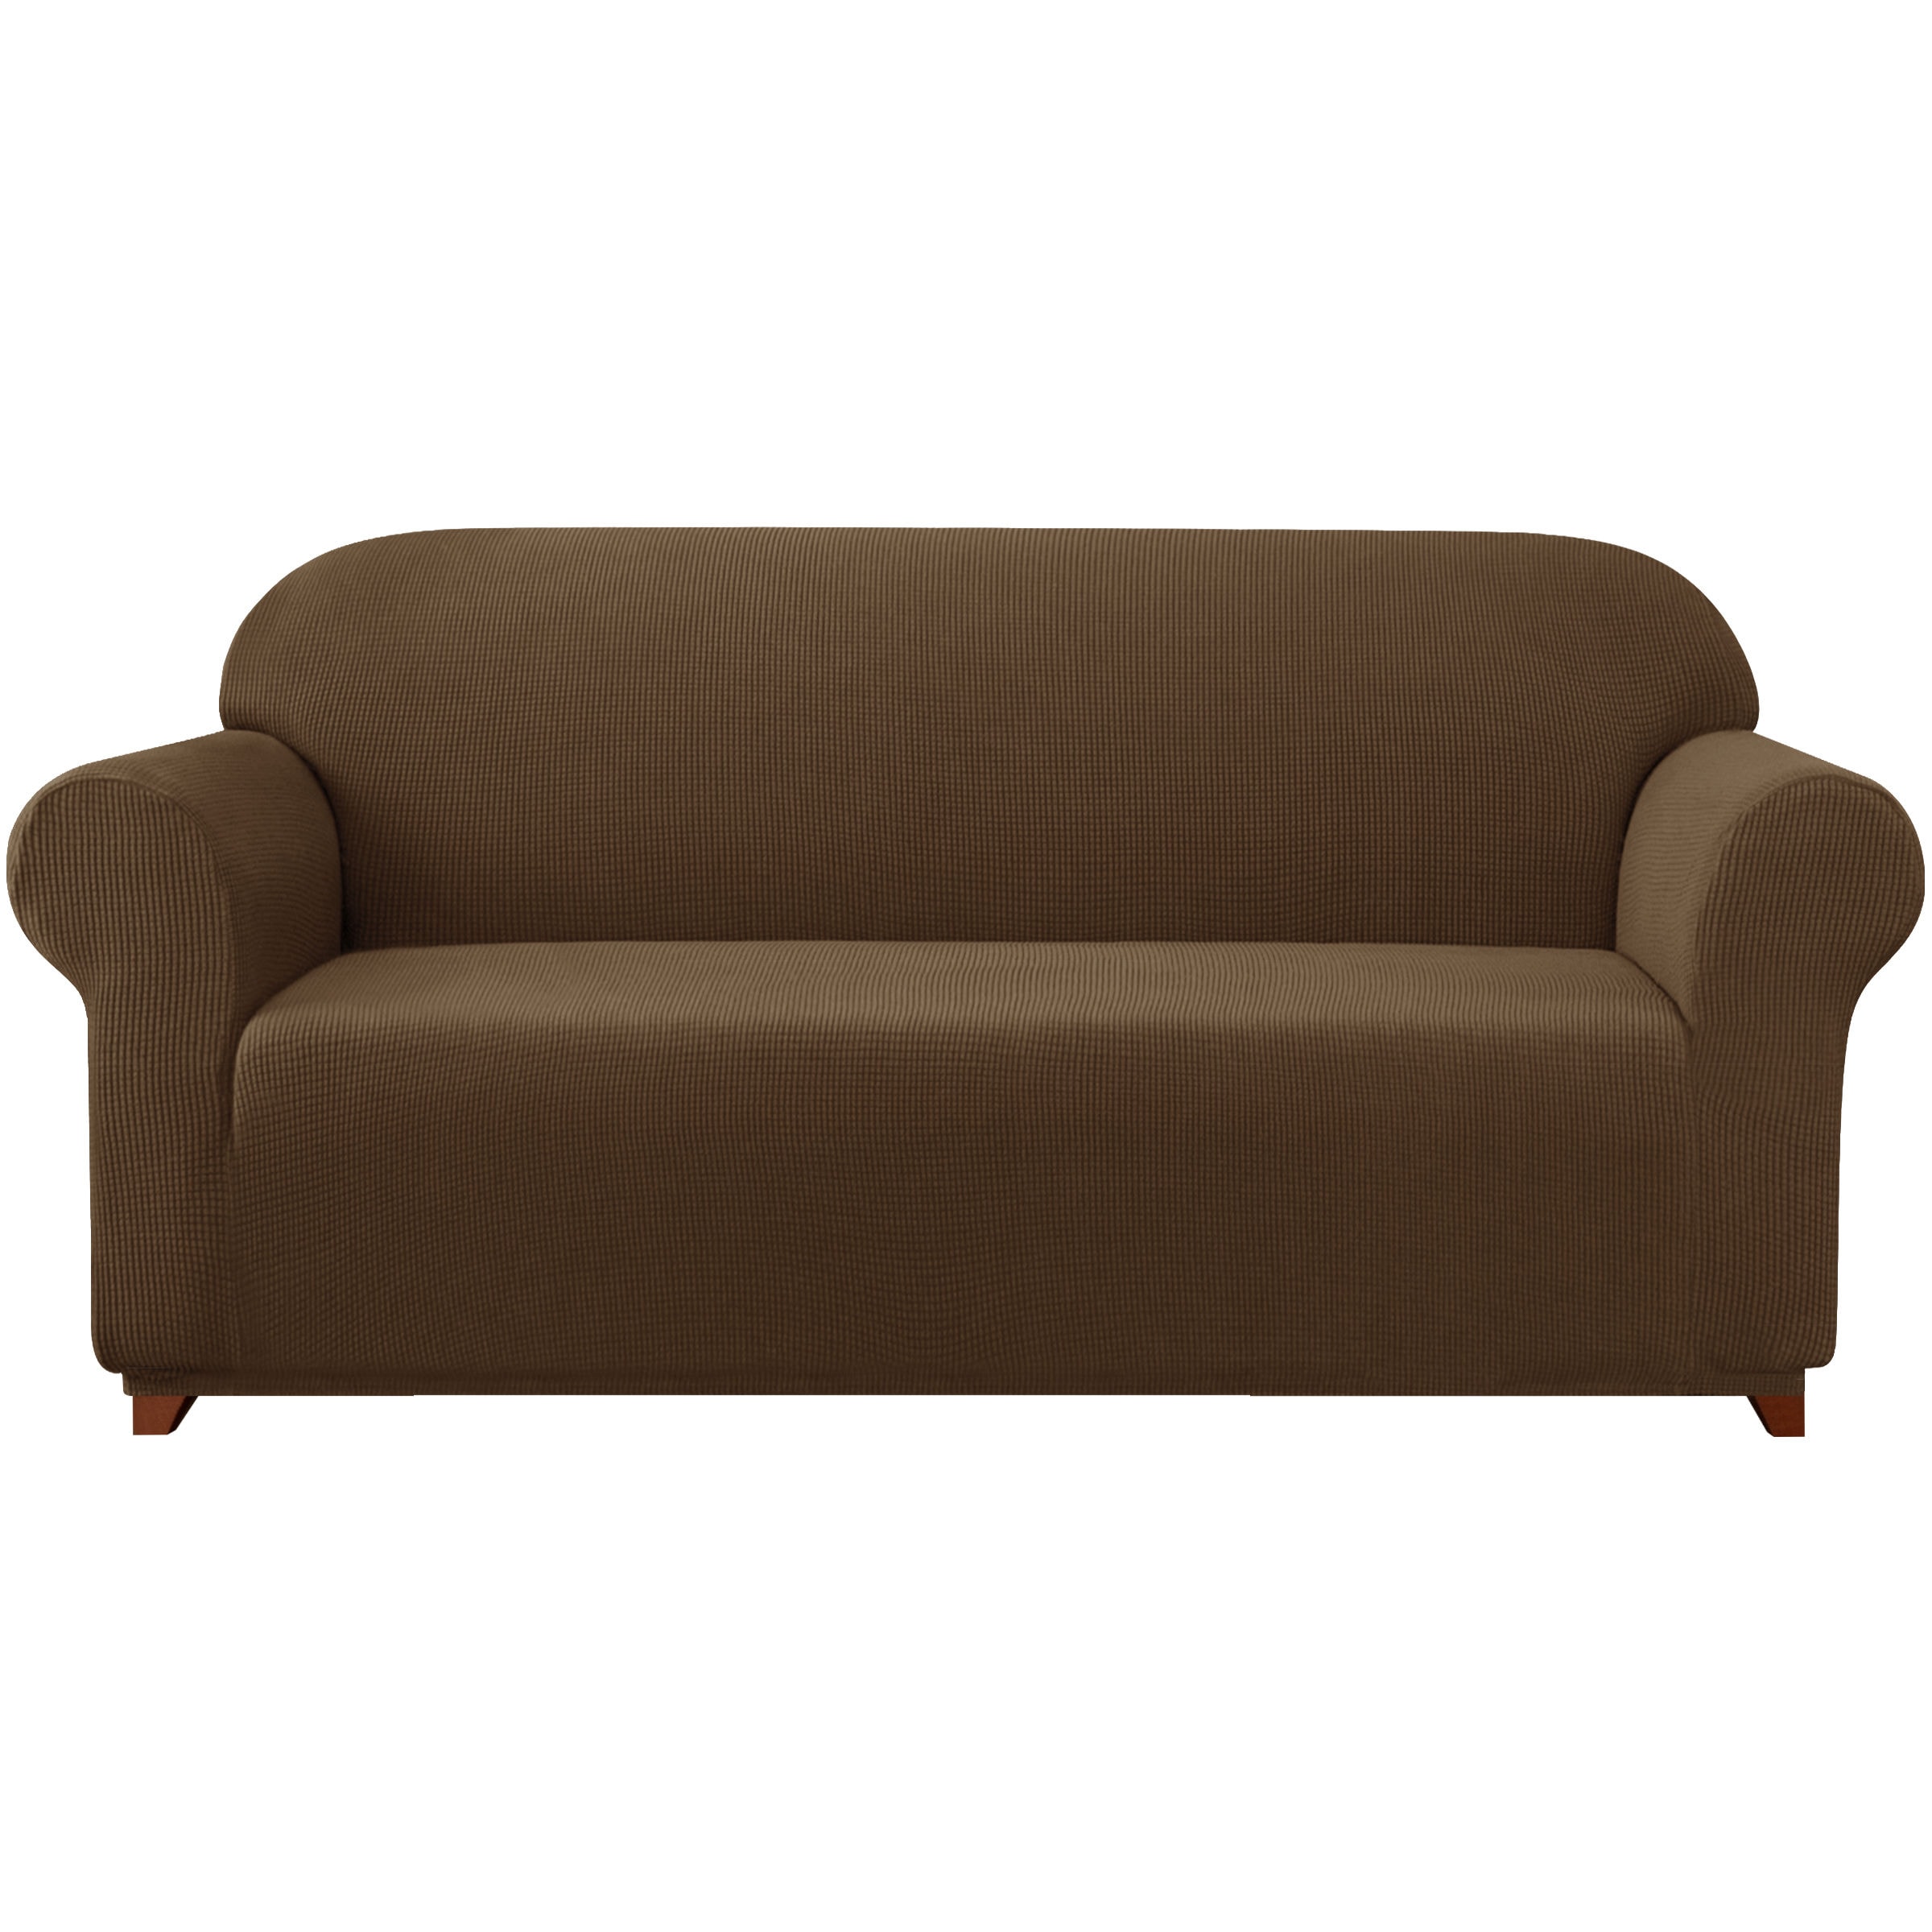 Textured Grid Coffee Jacquard Sofa Slipcover 118-in W x 41-in H x 42-in D Polyester in Brown | - Subrtex SBTSF3007